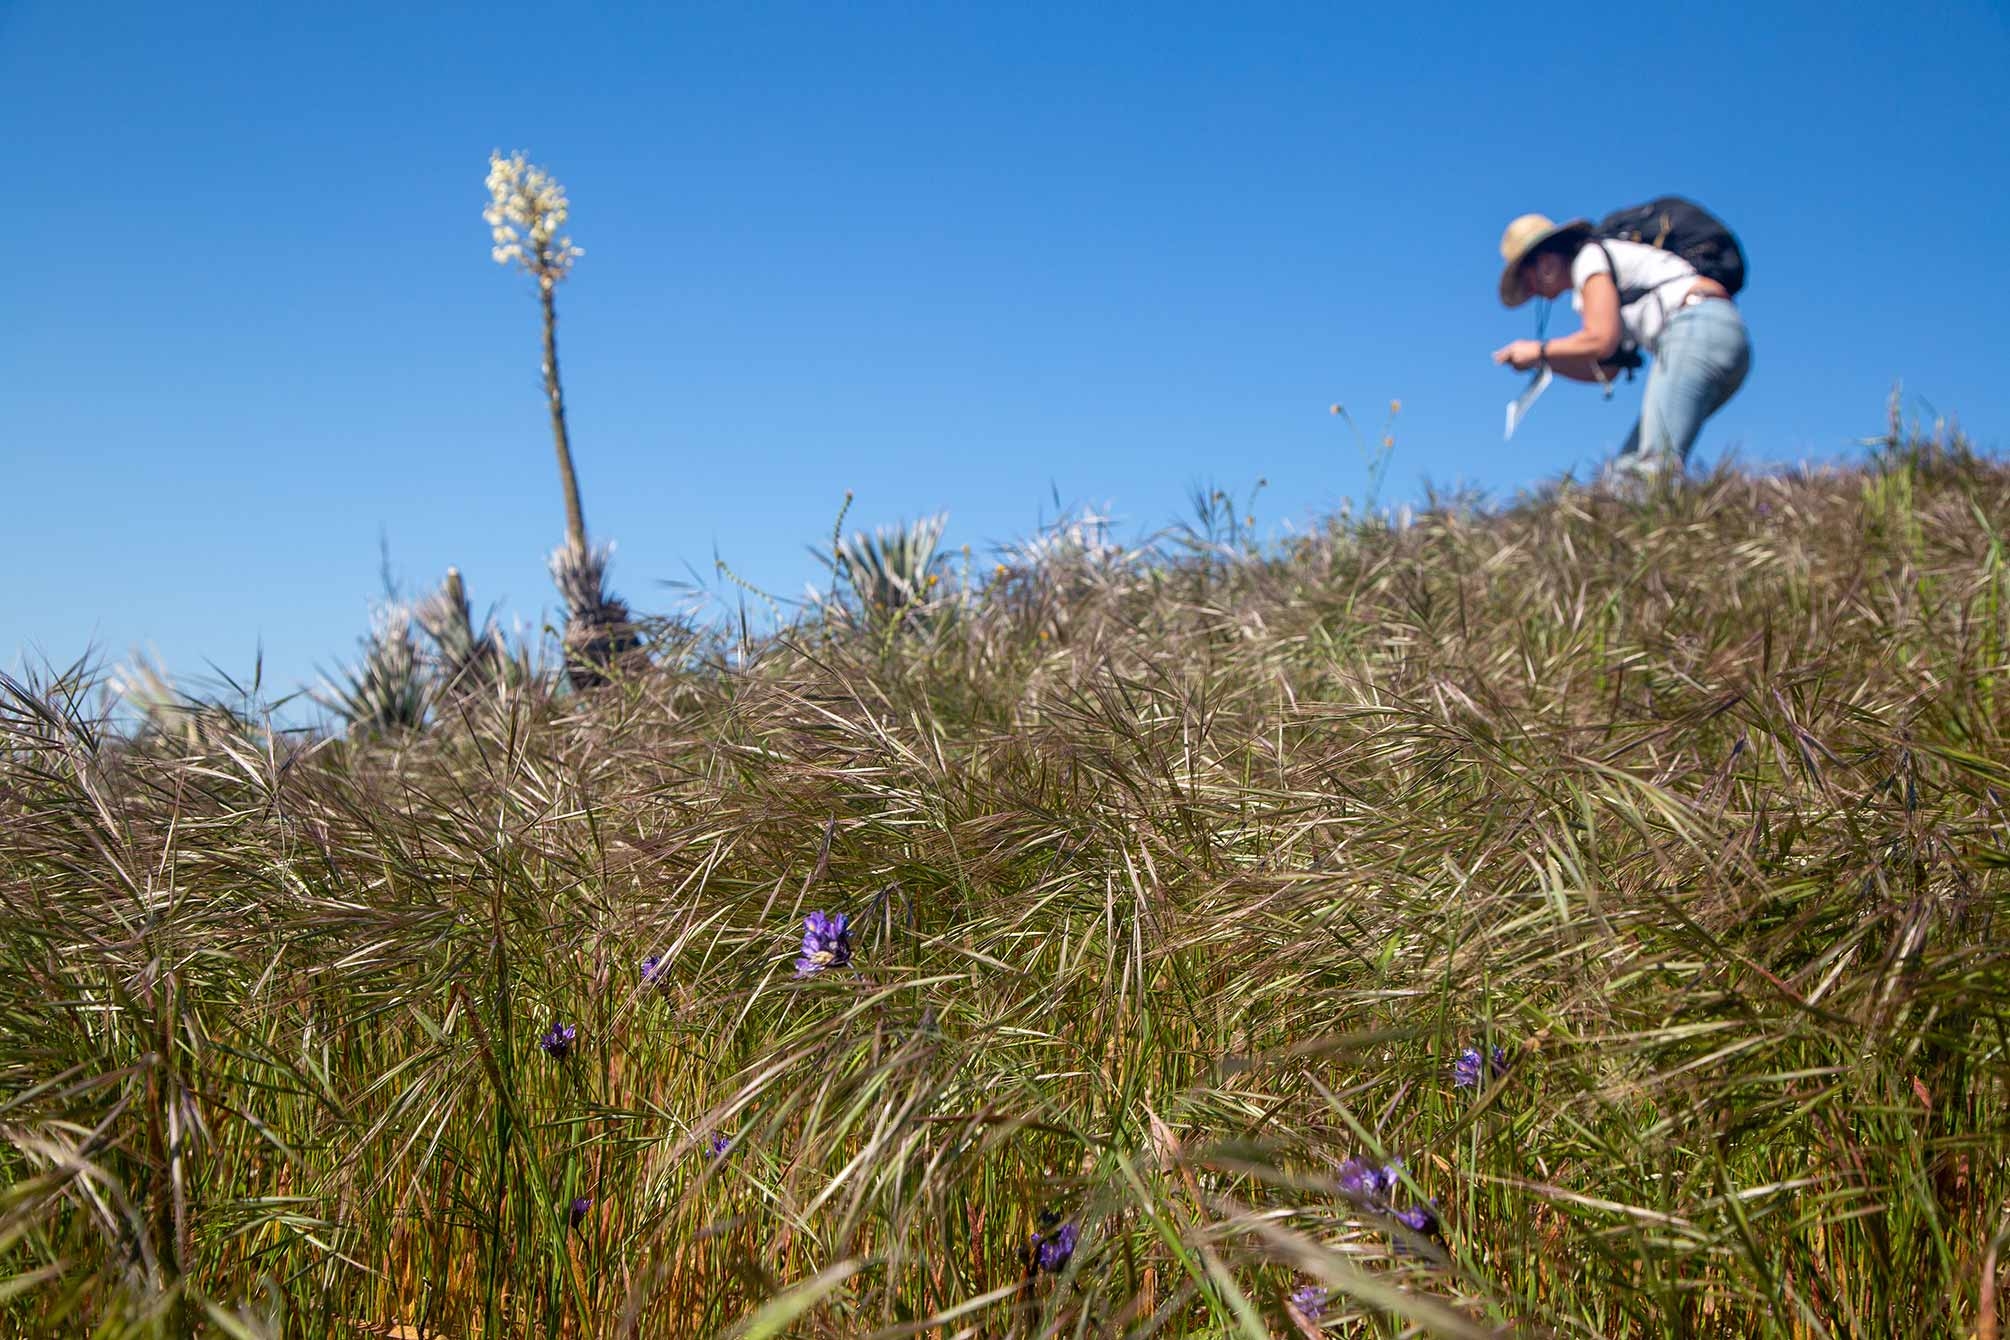 Purple flowers peak through the tall grass. In the background a researcher crouches for a photo of regenerating yucca stumps.